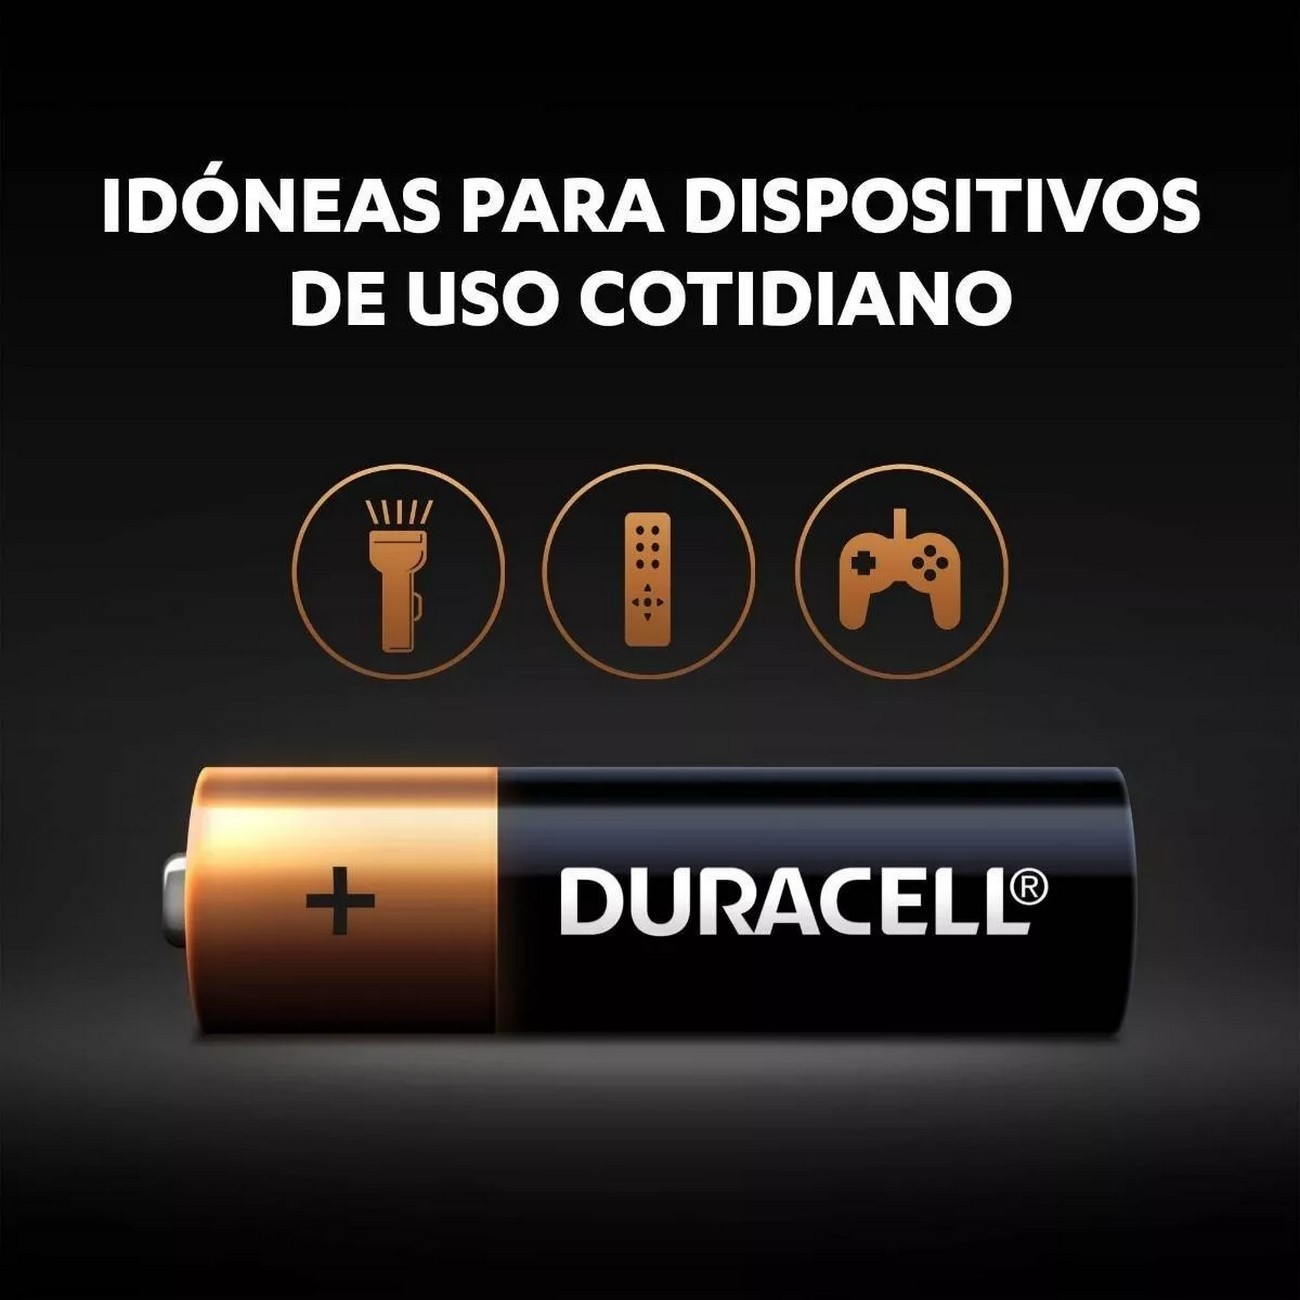 Pilas alcalinas DURACELL AAA (Paquete 4 unds) - LOAN Papeleria